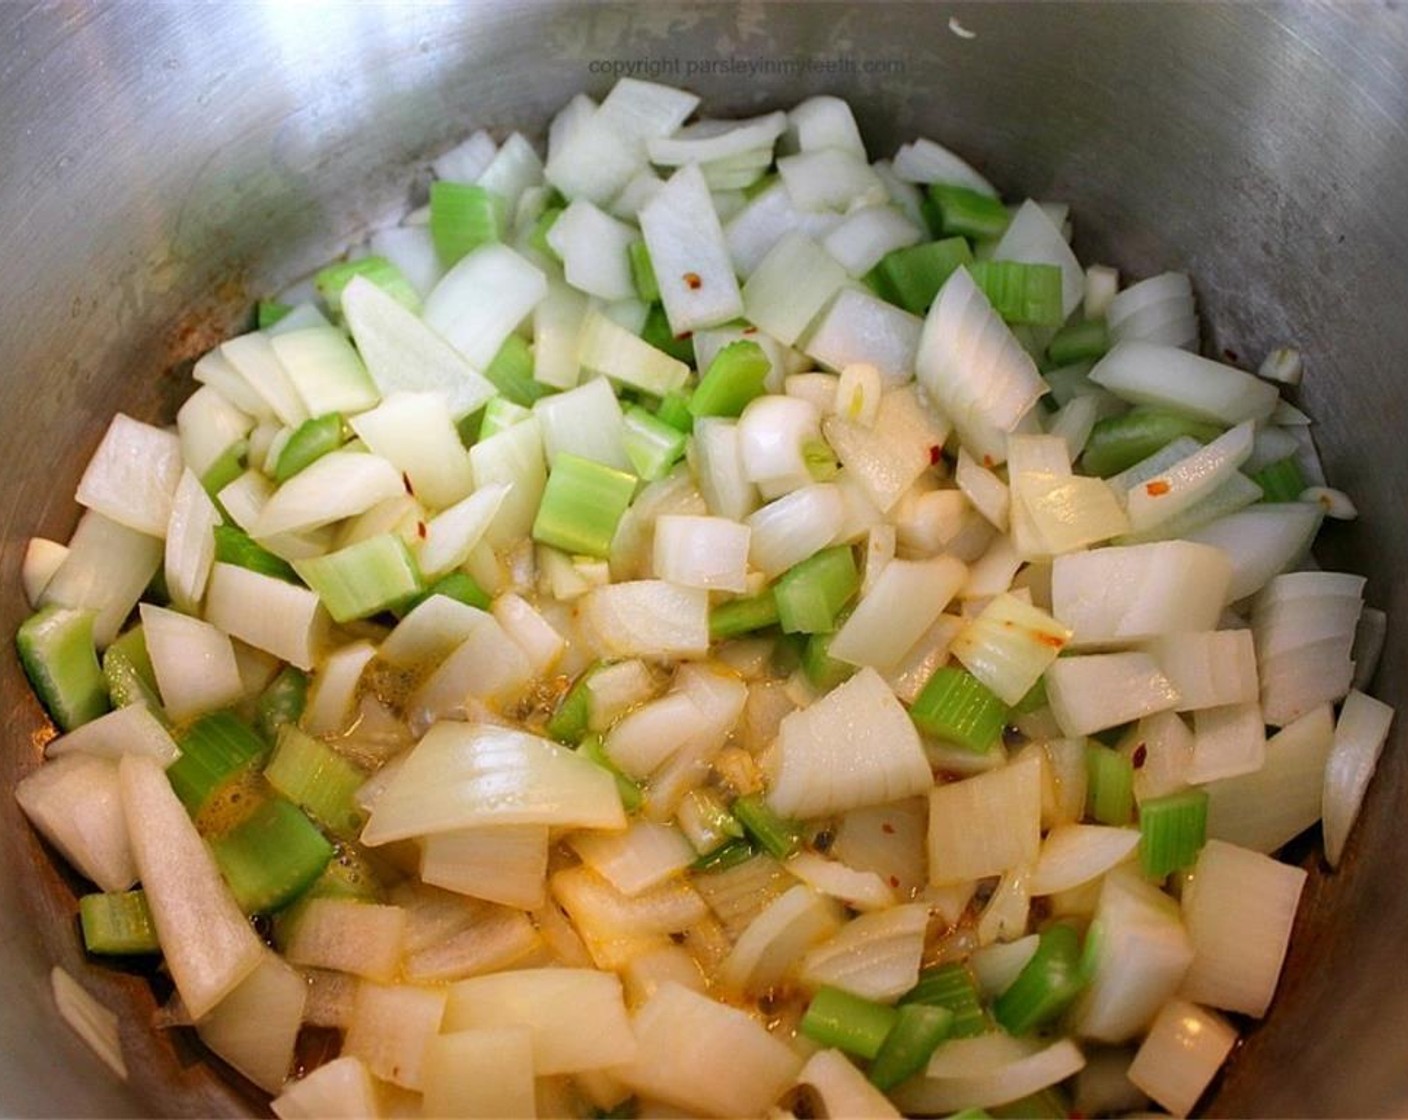 step 2 In a large soup pot, pour Vegetable Broth (1/2 cup) to cover the bottom of the pot. Add Crushed Red Pepper Flakes (1/2 tsp), White Onion (1), Celery (3 stalks), and Garlic (3 cloves). Cook over medium heat for 2 minutes, stirring frequently.